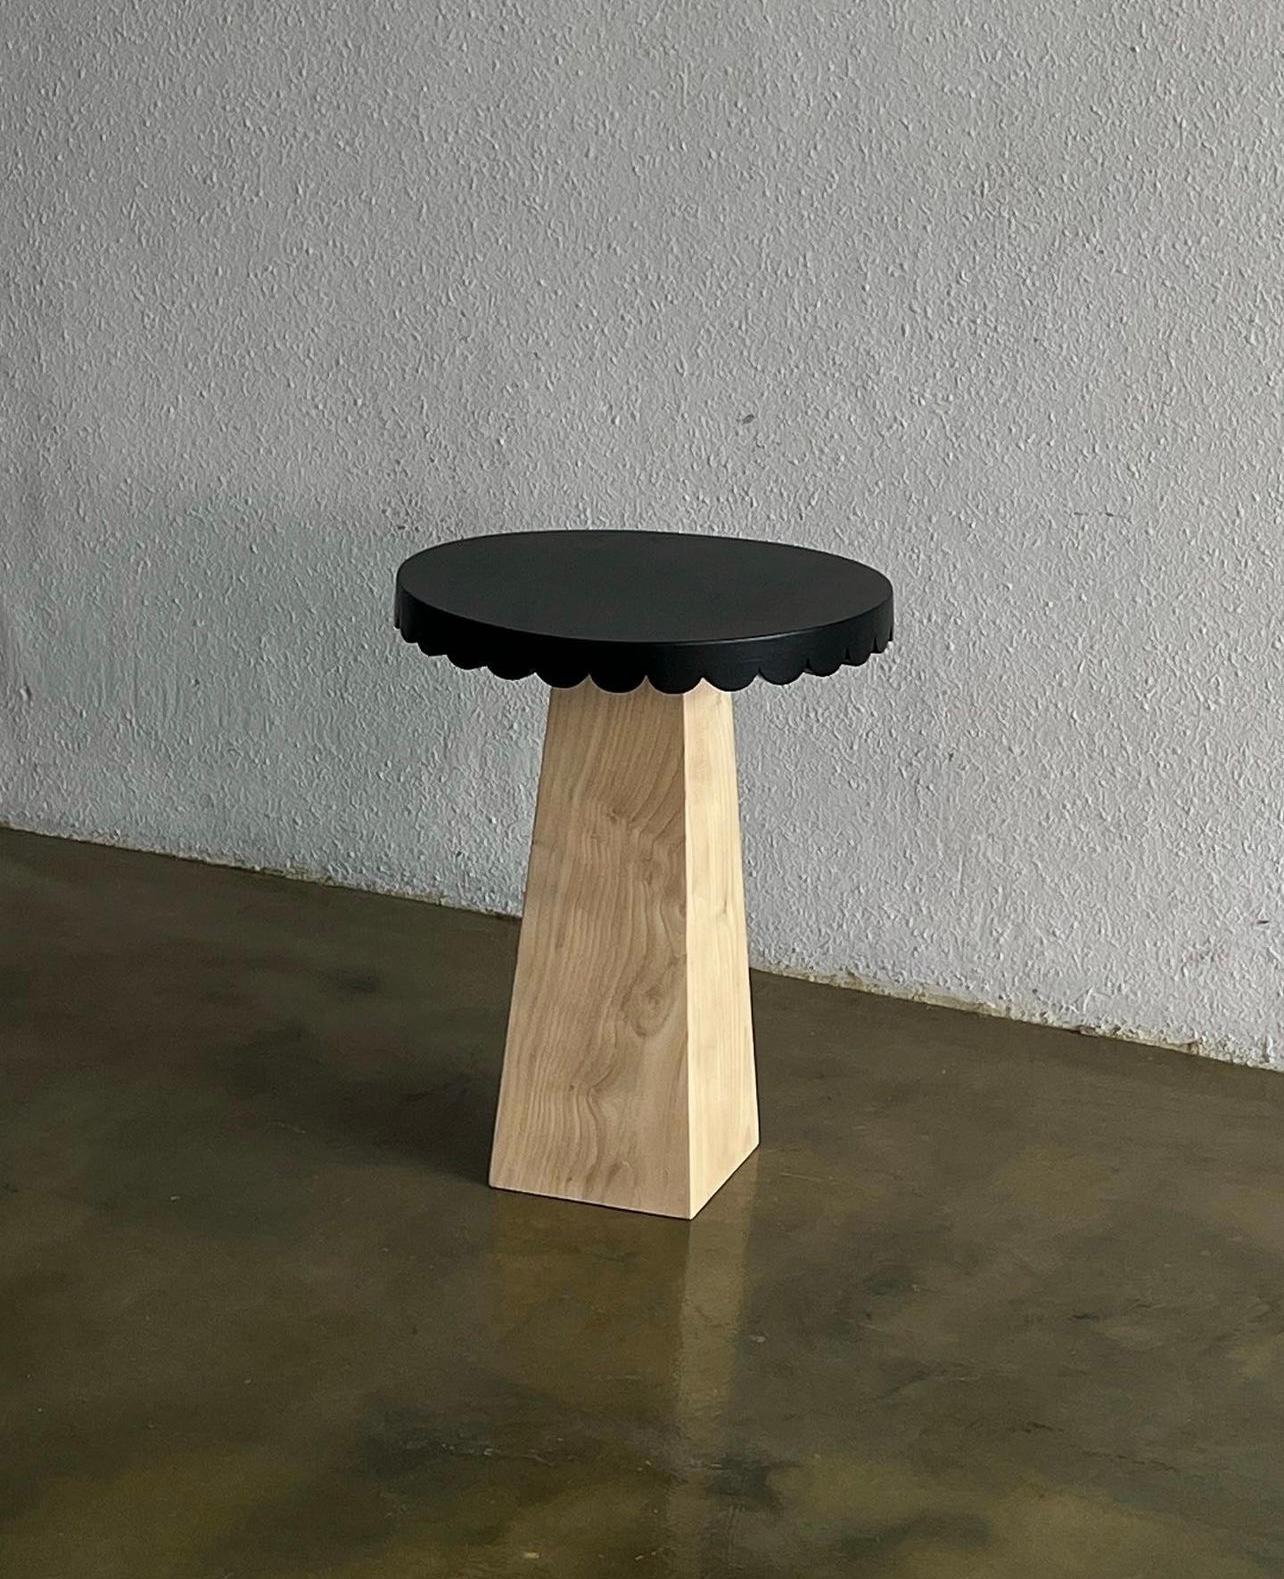 Tent Side Table by Studio Kallang
Dimensions: W 45 x D 45 x H 55 cm
Materials: Solid Sungkai.

STUDIO KALLANG IS A SINGAPORE AND SEATTLE BASED PROJECT FOCUSING ON OBJECTS DESIGNED BY FAEZAH SHAHARUDDIN.
PIECES ARE PLAYFUL EXPLORATIONS IN FORM,